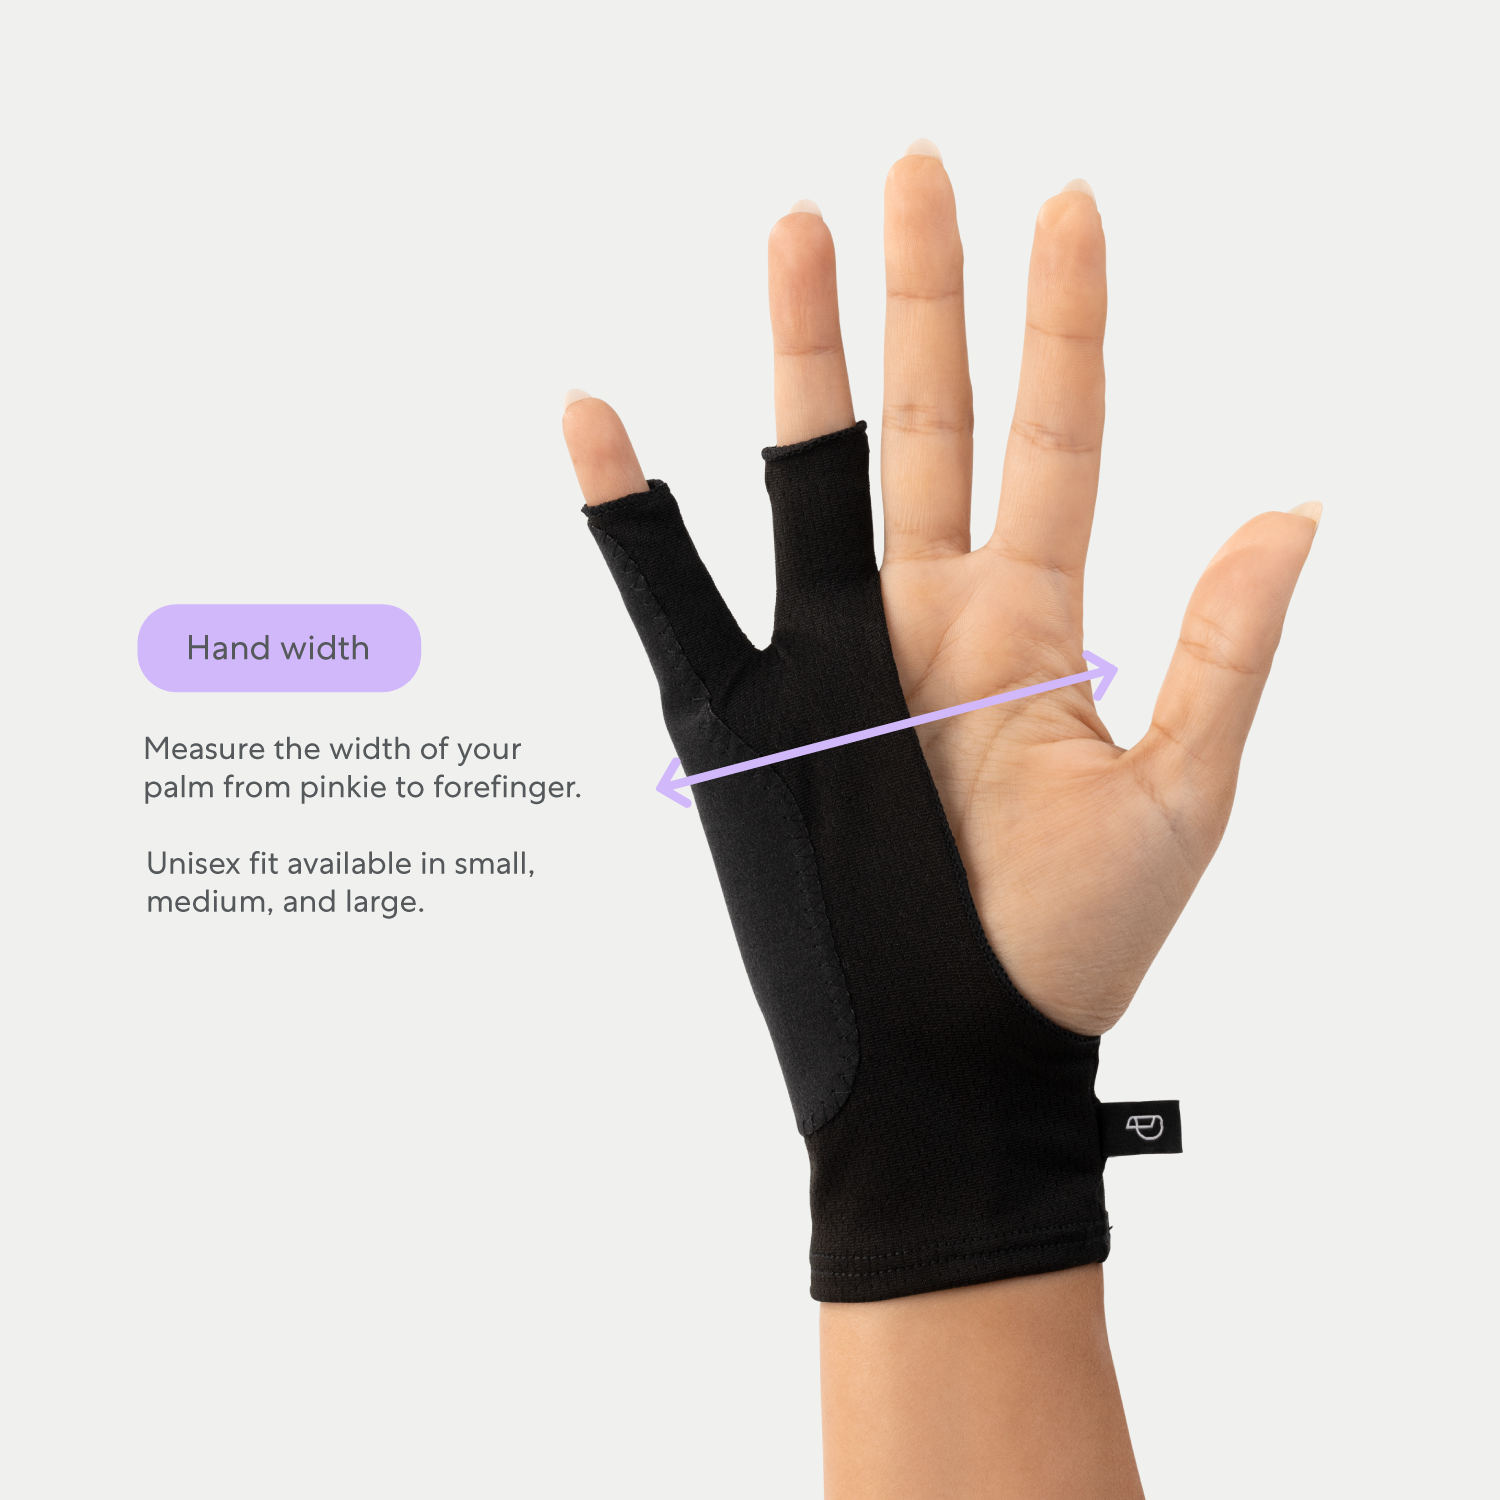 Paperlike's drawing glove comes in 3 sizes, small, medium, and large, fits both hands, made for men and women.